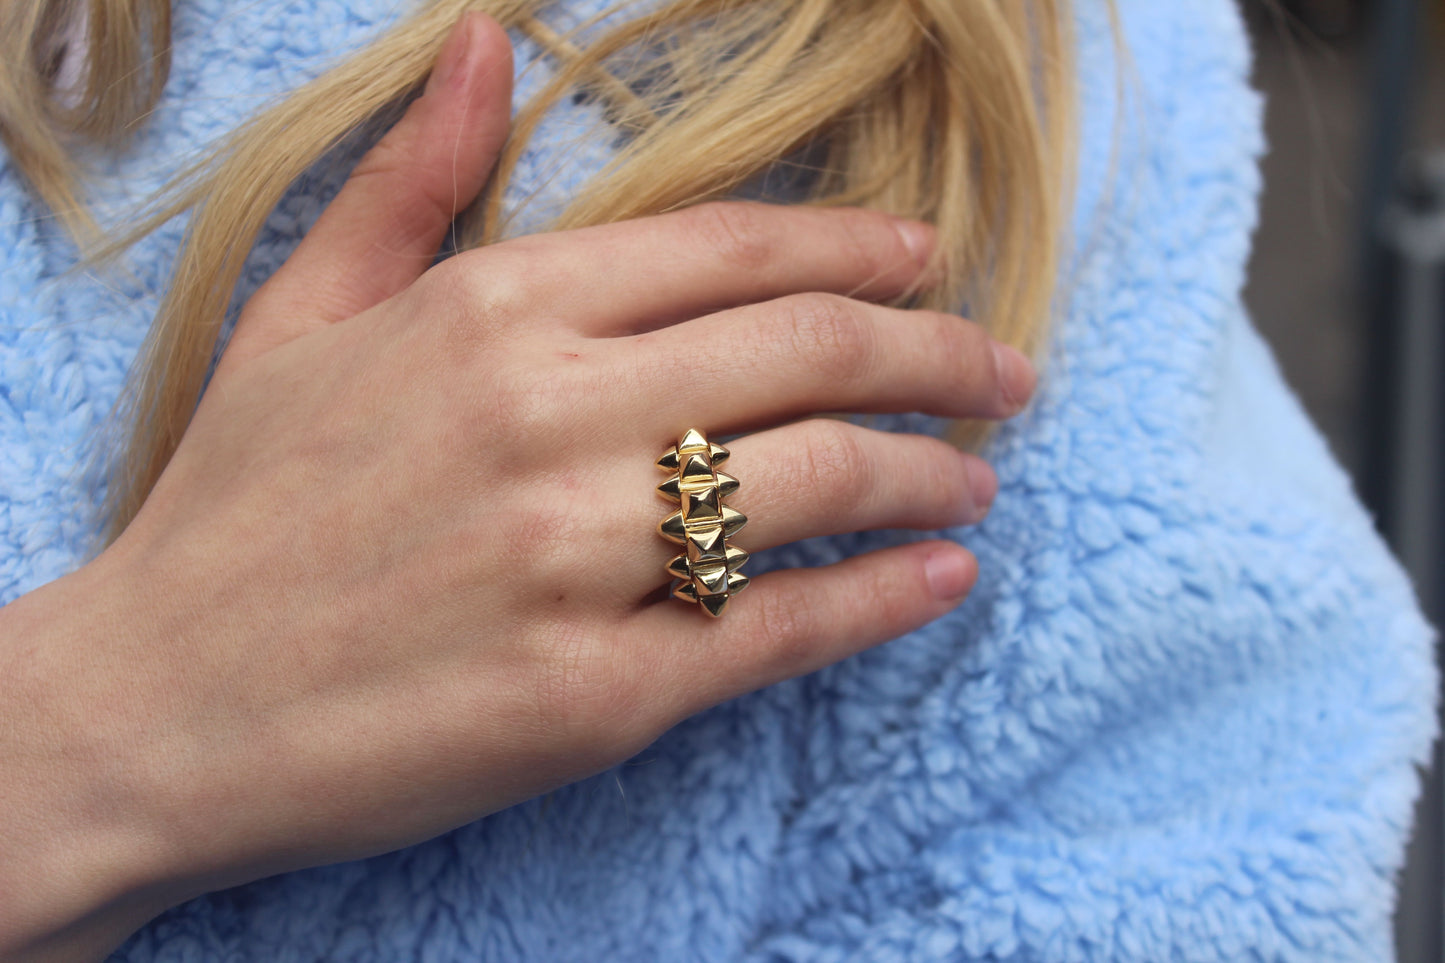 14k Gold Clash Ring, Gold Spike Ring, Gold Clash Ring, Gold Spike Ring, Gold Stacking Ring, Gift For Her, Christmas Gift